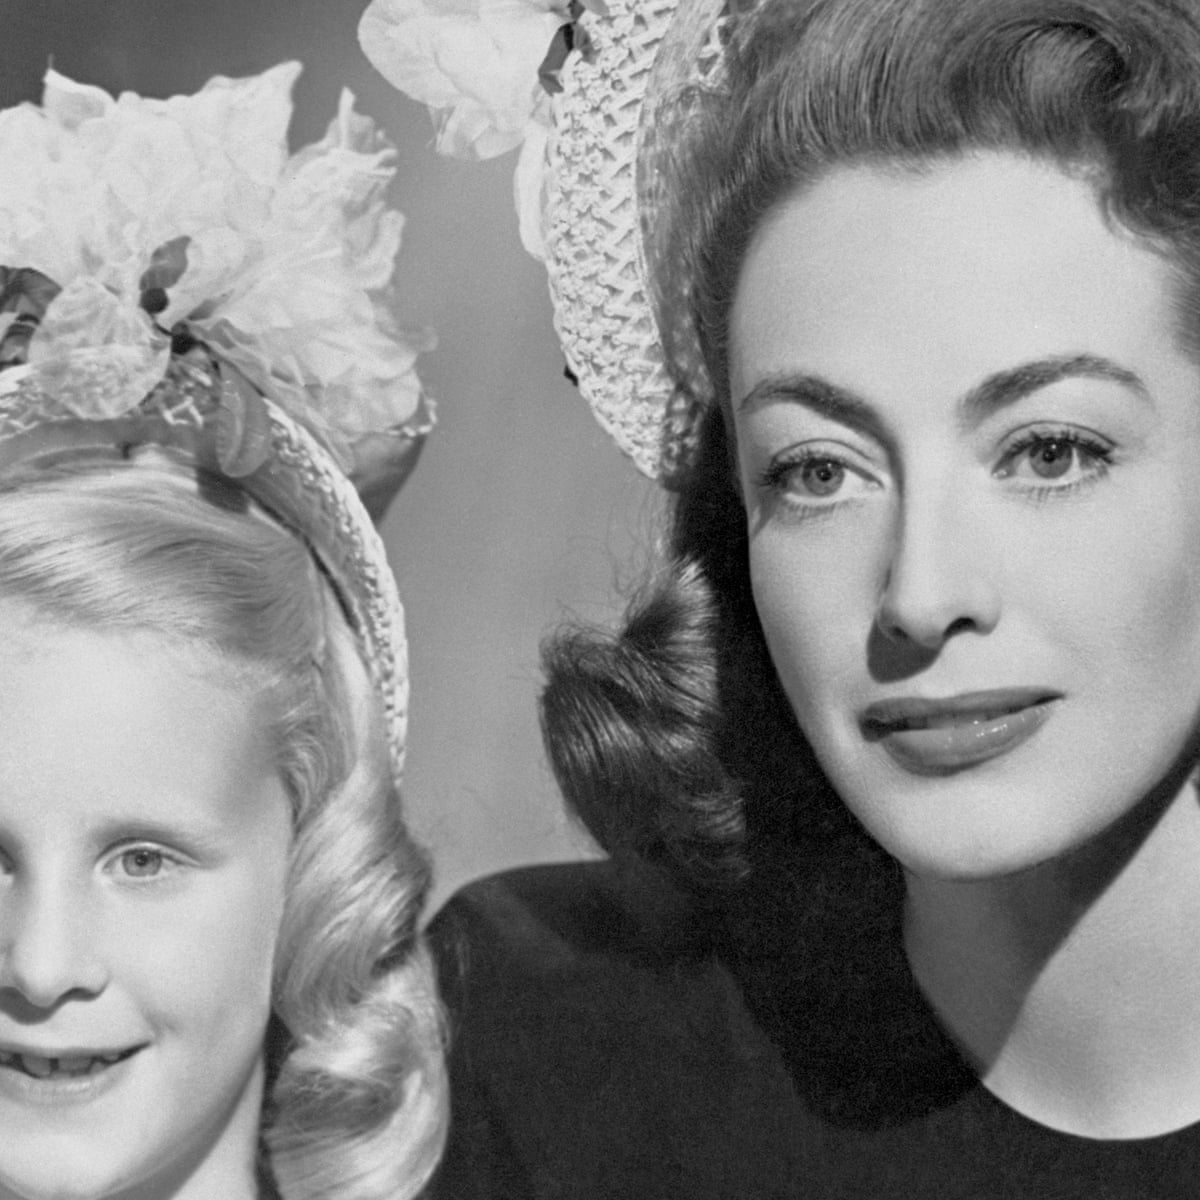 Christina Crawford on life after Mommie Dearest: 'My mother should have been in jail'